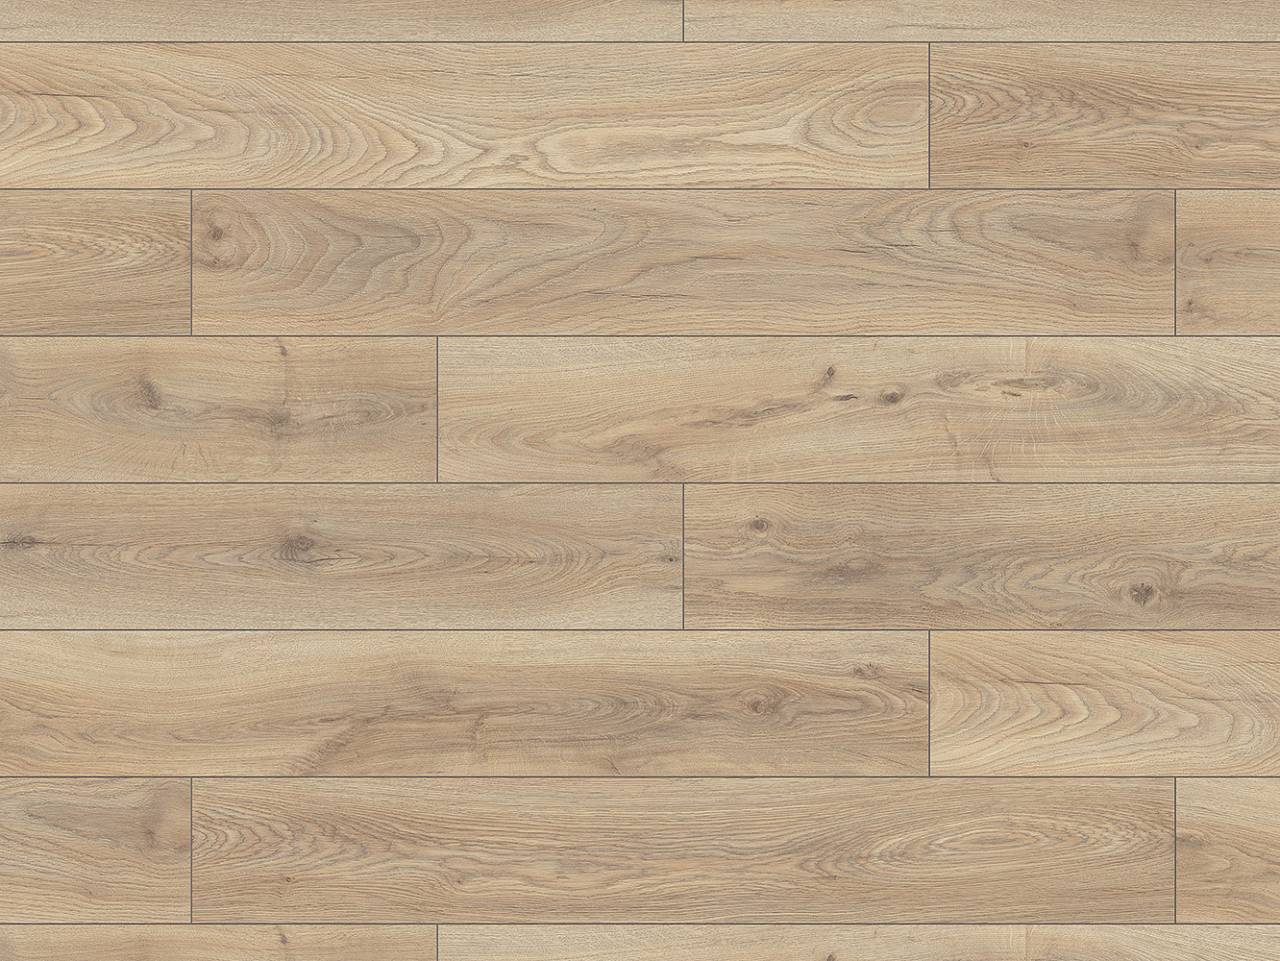 Close-up view of K452 Ashland Oak: Showcasing its remarkable oak grain texture and the inviting warmth of its earthy tones.